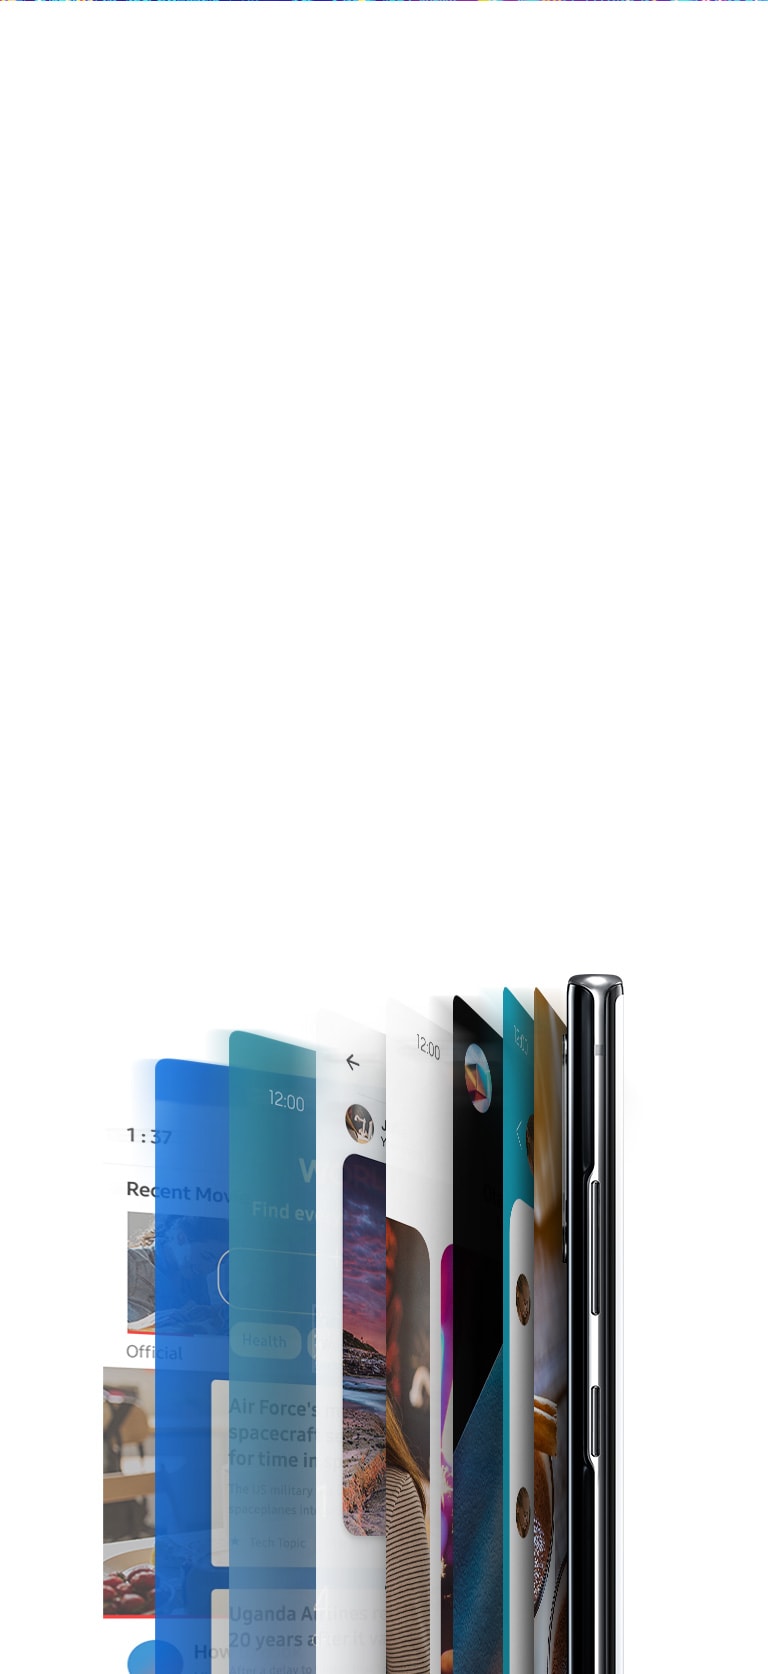 Various smartphone application screens are stacked behind a smartphone.